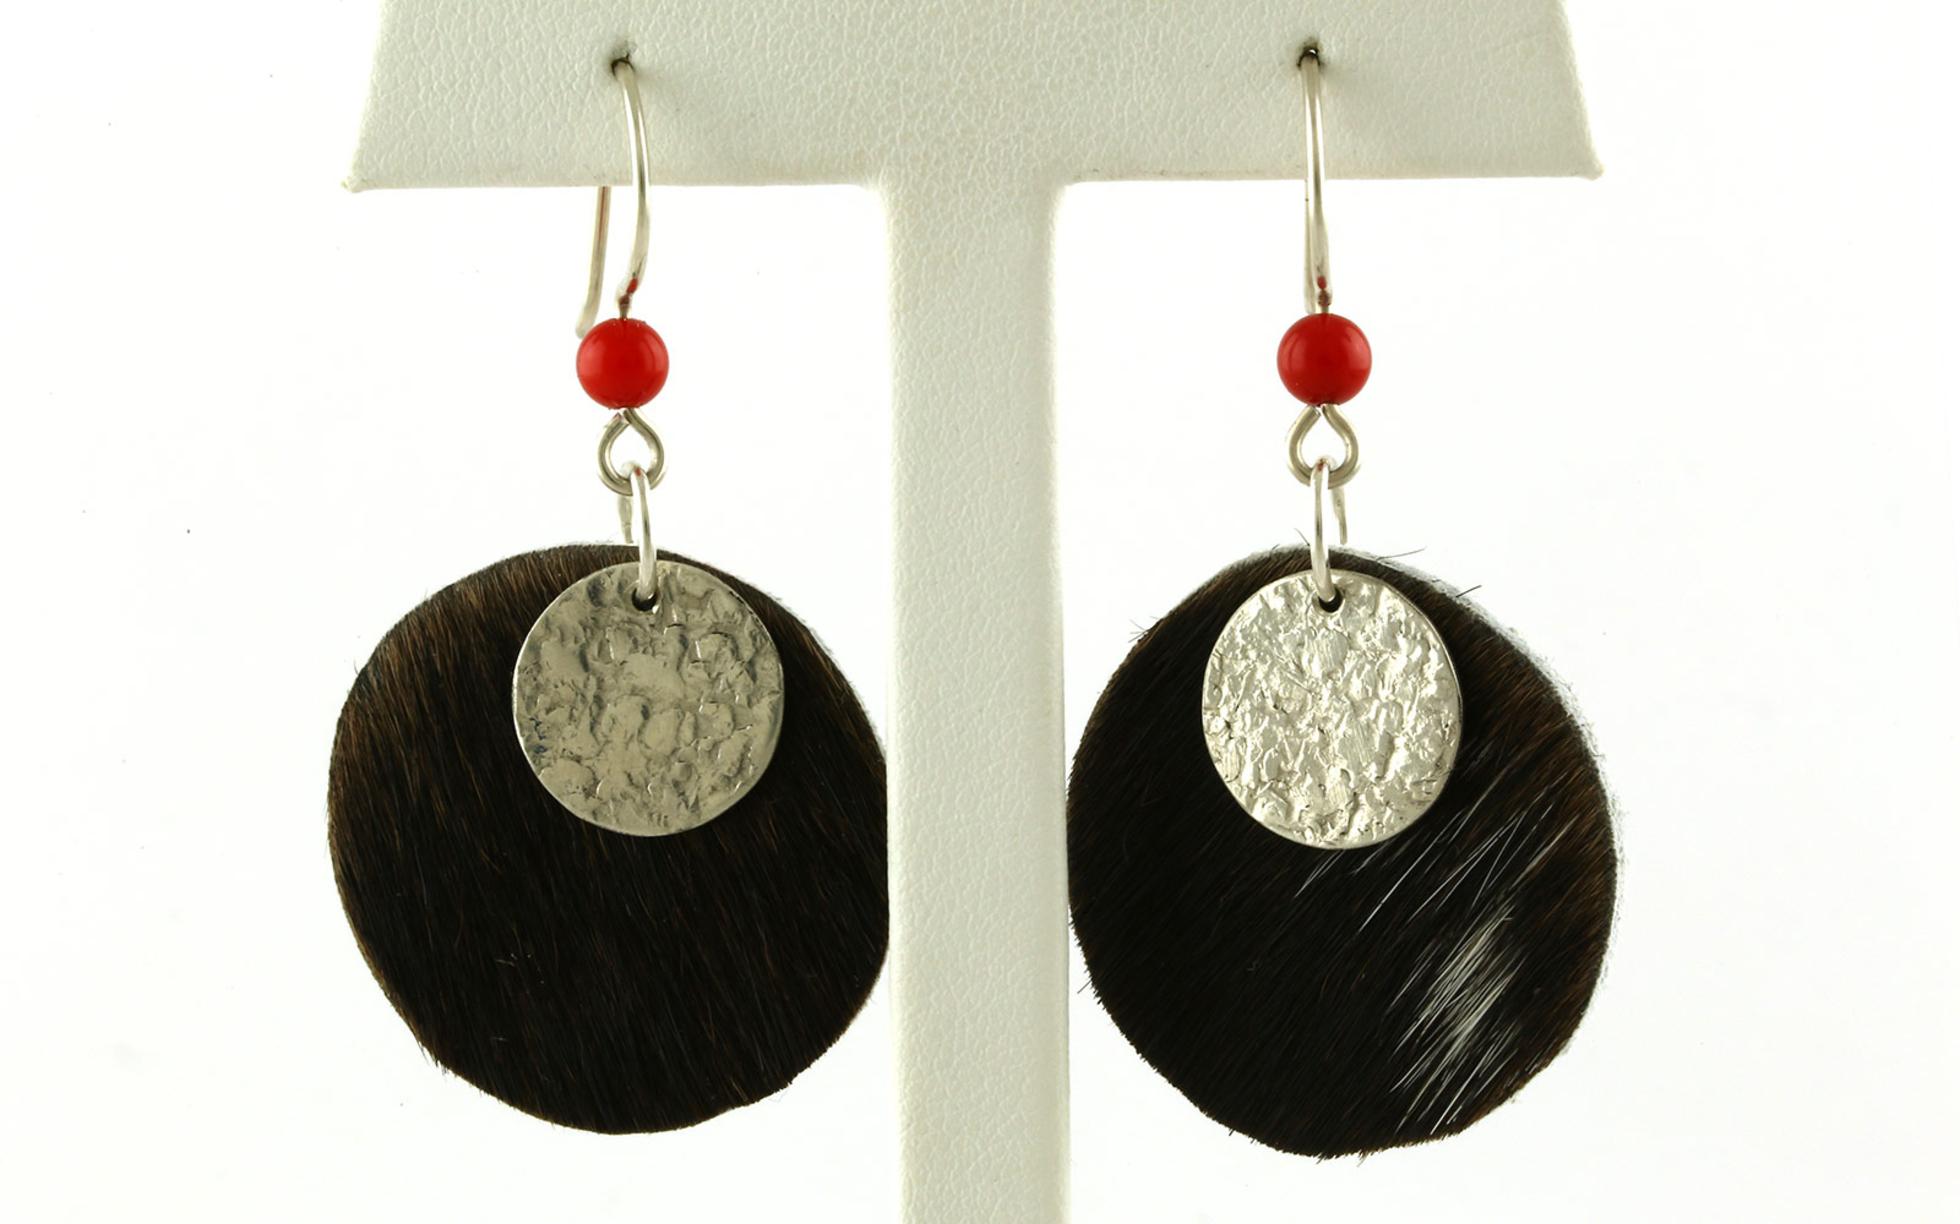 Double Disc Dangle Earrings with Coral Bead in Brown and White Cowhide and Sterling Silver